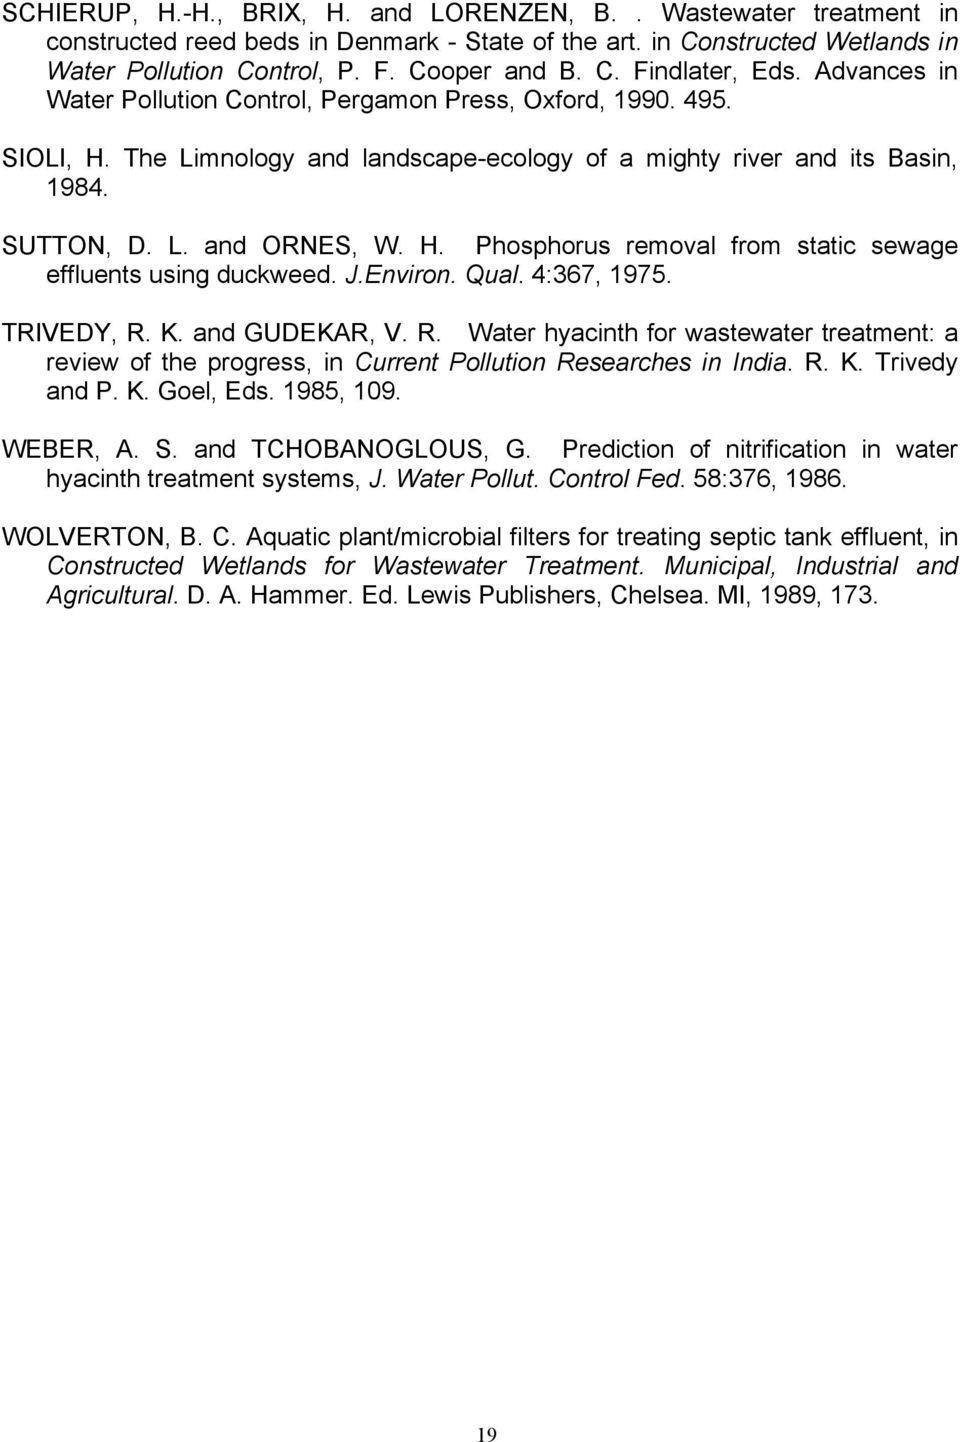 J.Environ. Qual. 4:367, 1975. TRIVEDY, R. K. and GUDEKAR, V. R. Water hyacinth for wastewater treatment: a review of the progress, in Current Pollution Researches in India. R. K. Trivedy and P. K. Goel, Eds.